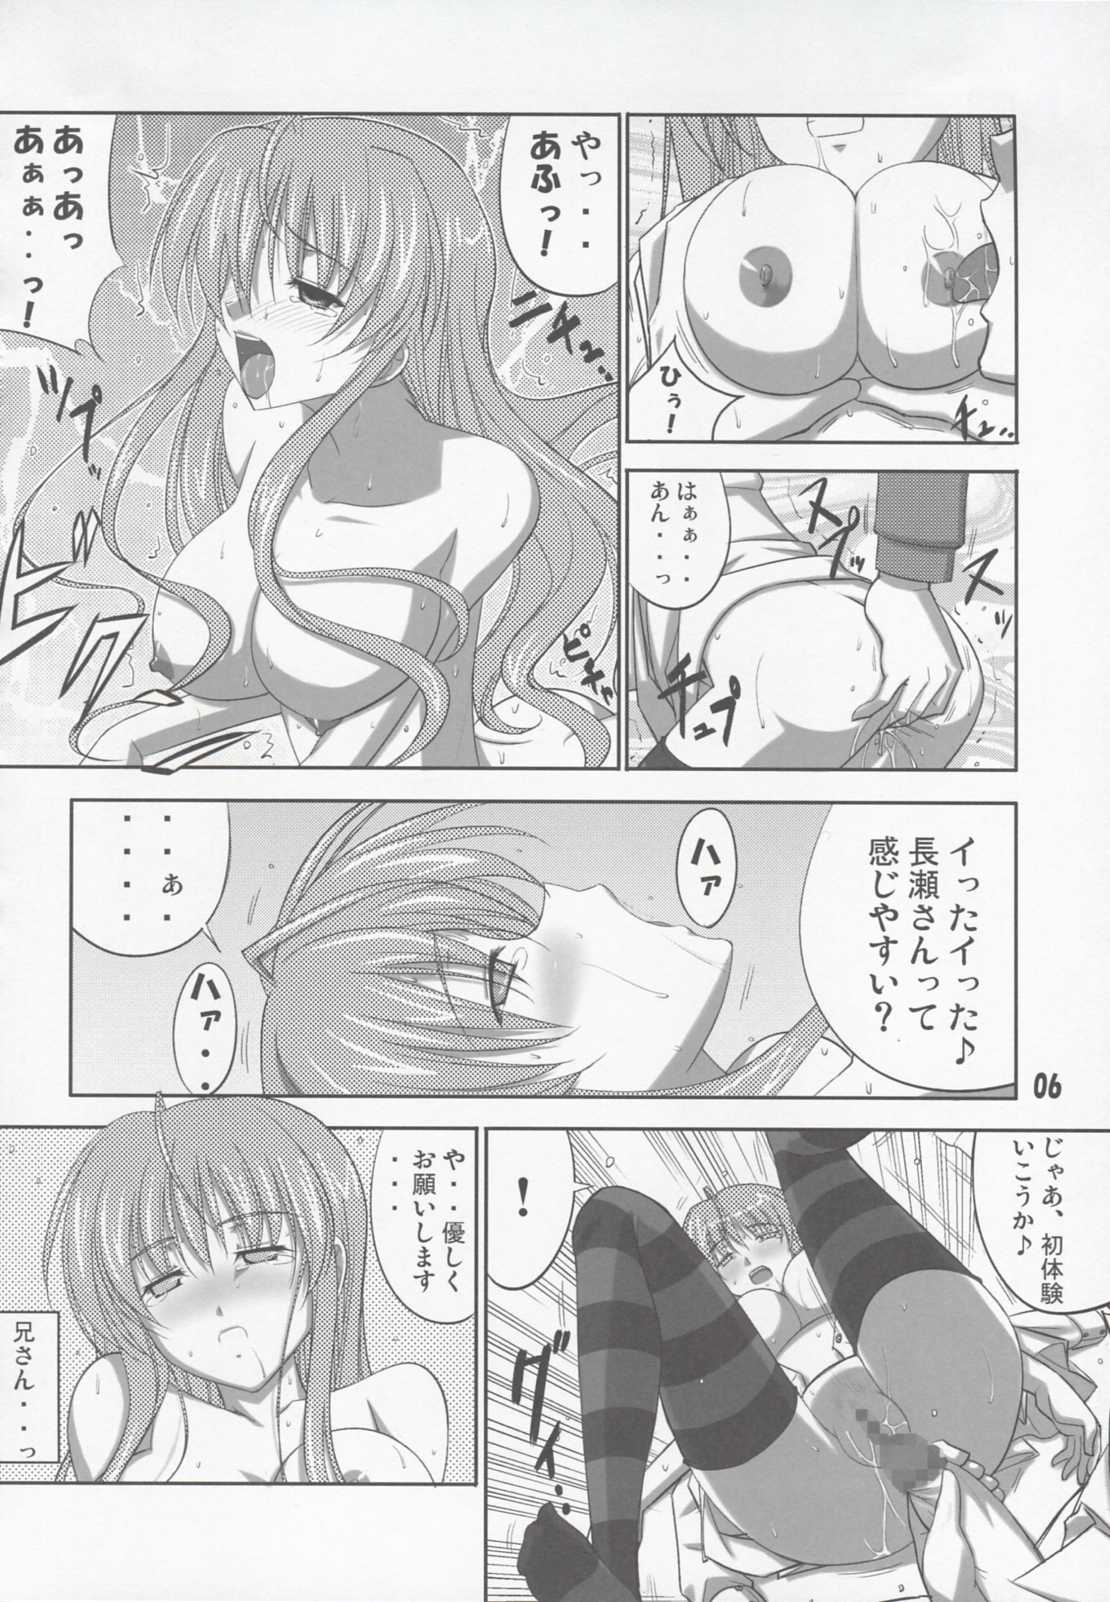 [The Shaft of Fallen Angels] She turned red, and&hellip; (Akaneiro ni Somaru Saka) (COMIC1☆3) [Digital Lover （なかじまゆか）] D.L. Action 47 (とある魔術の禁書目録) [中文翻譯]